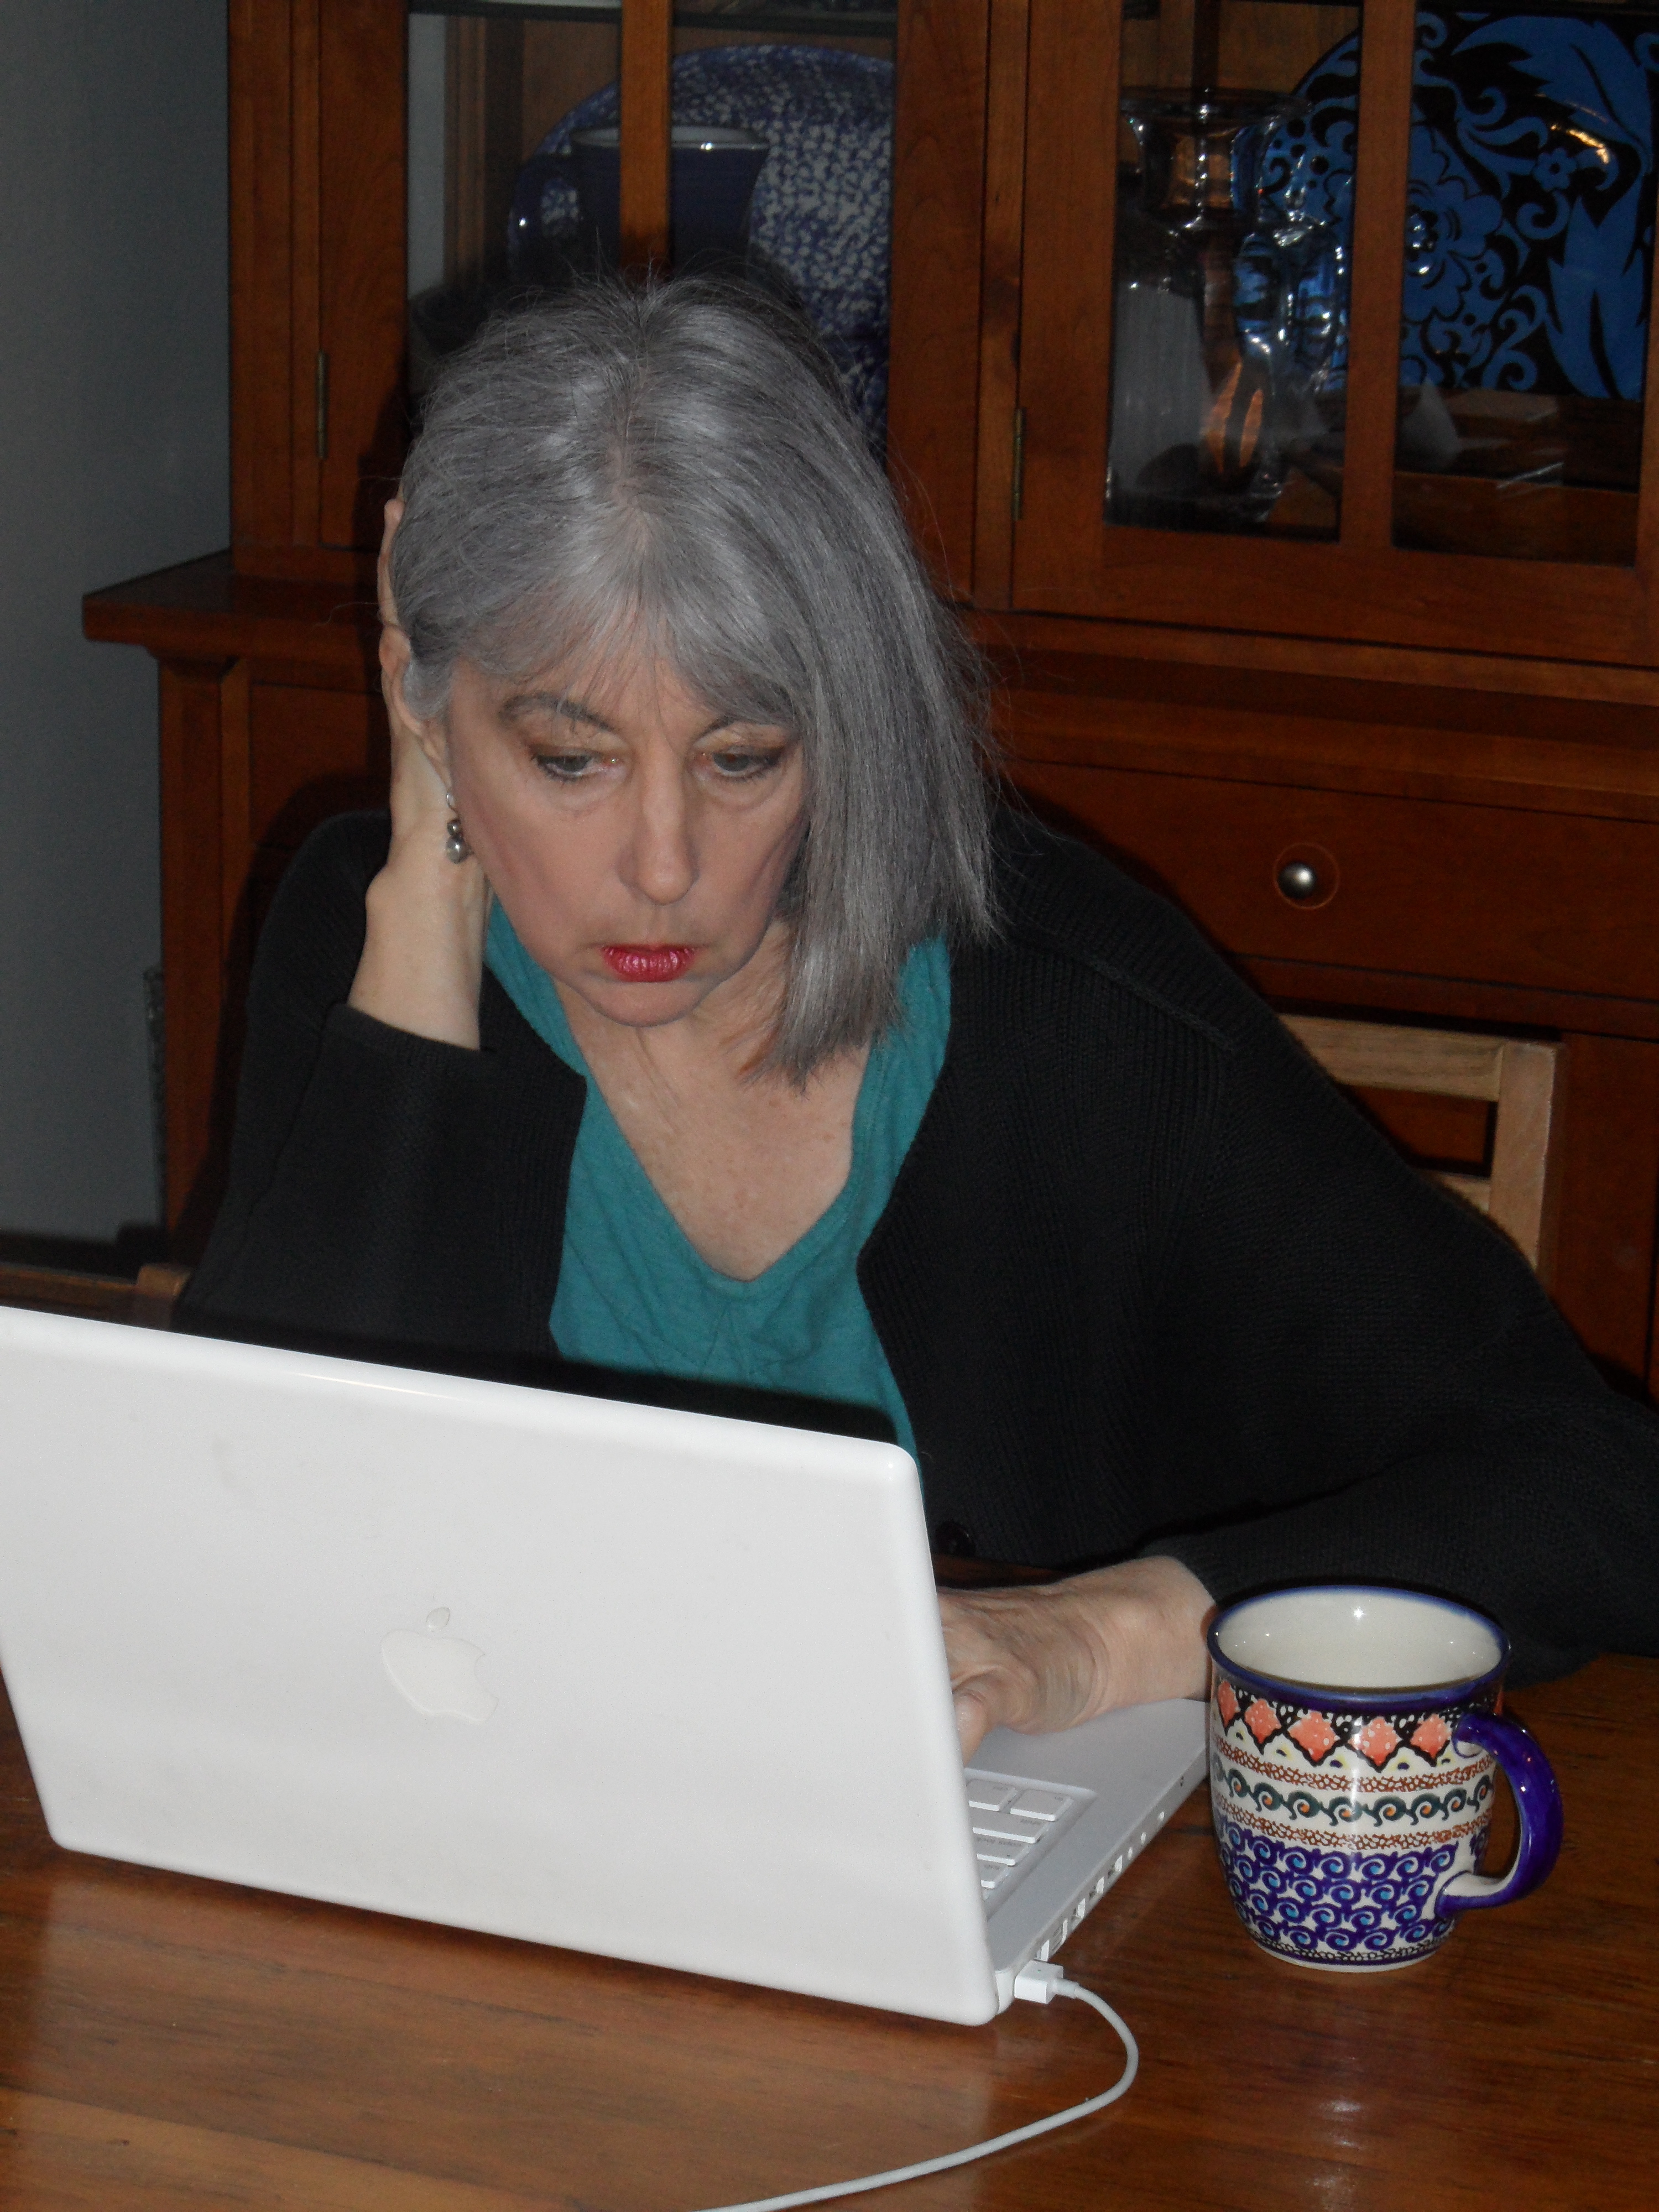 Jan Carr sitting at home, sitting table working on computer, with a cup of coffee at the ready.